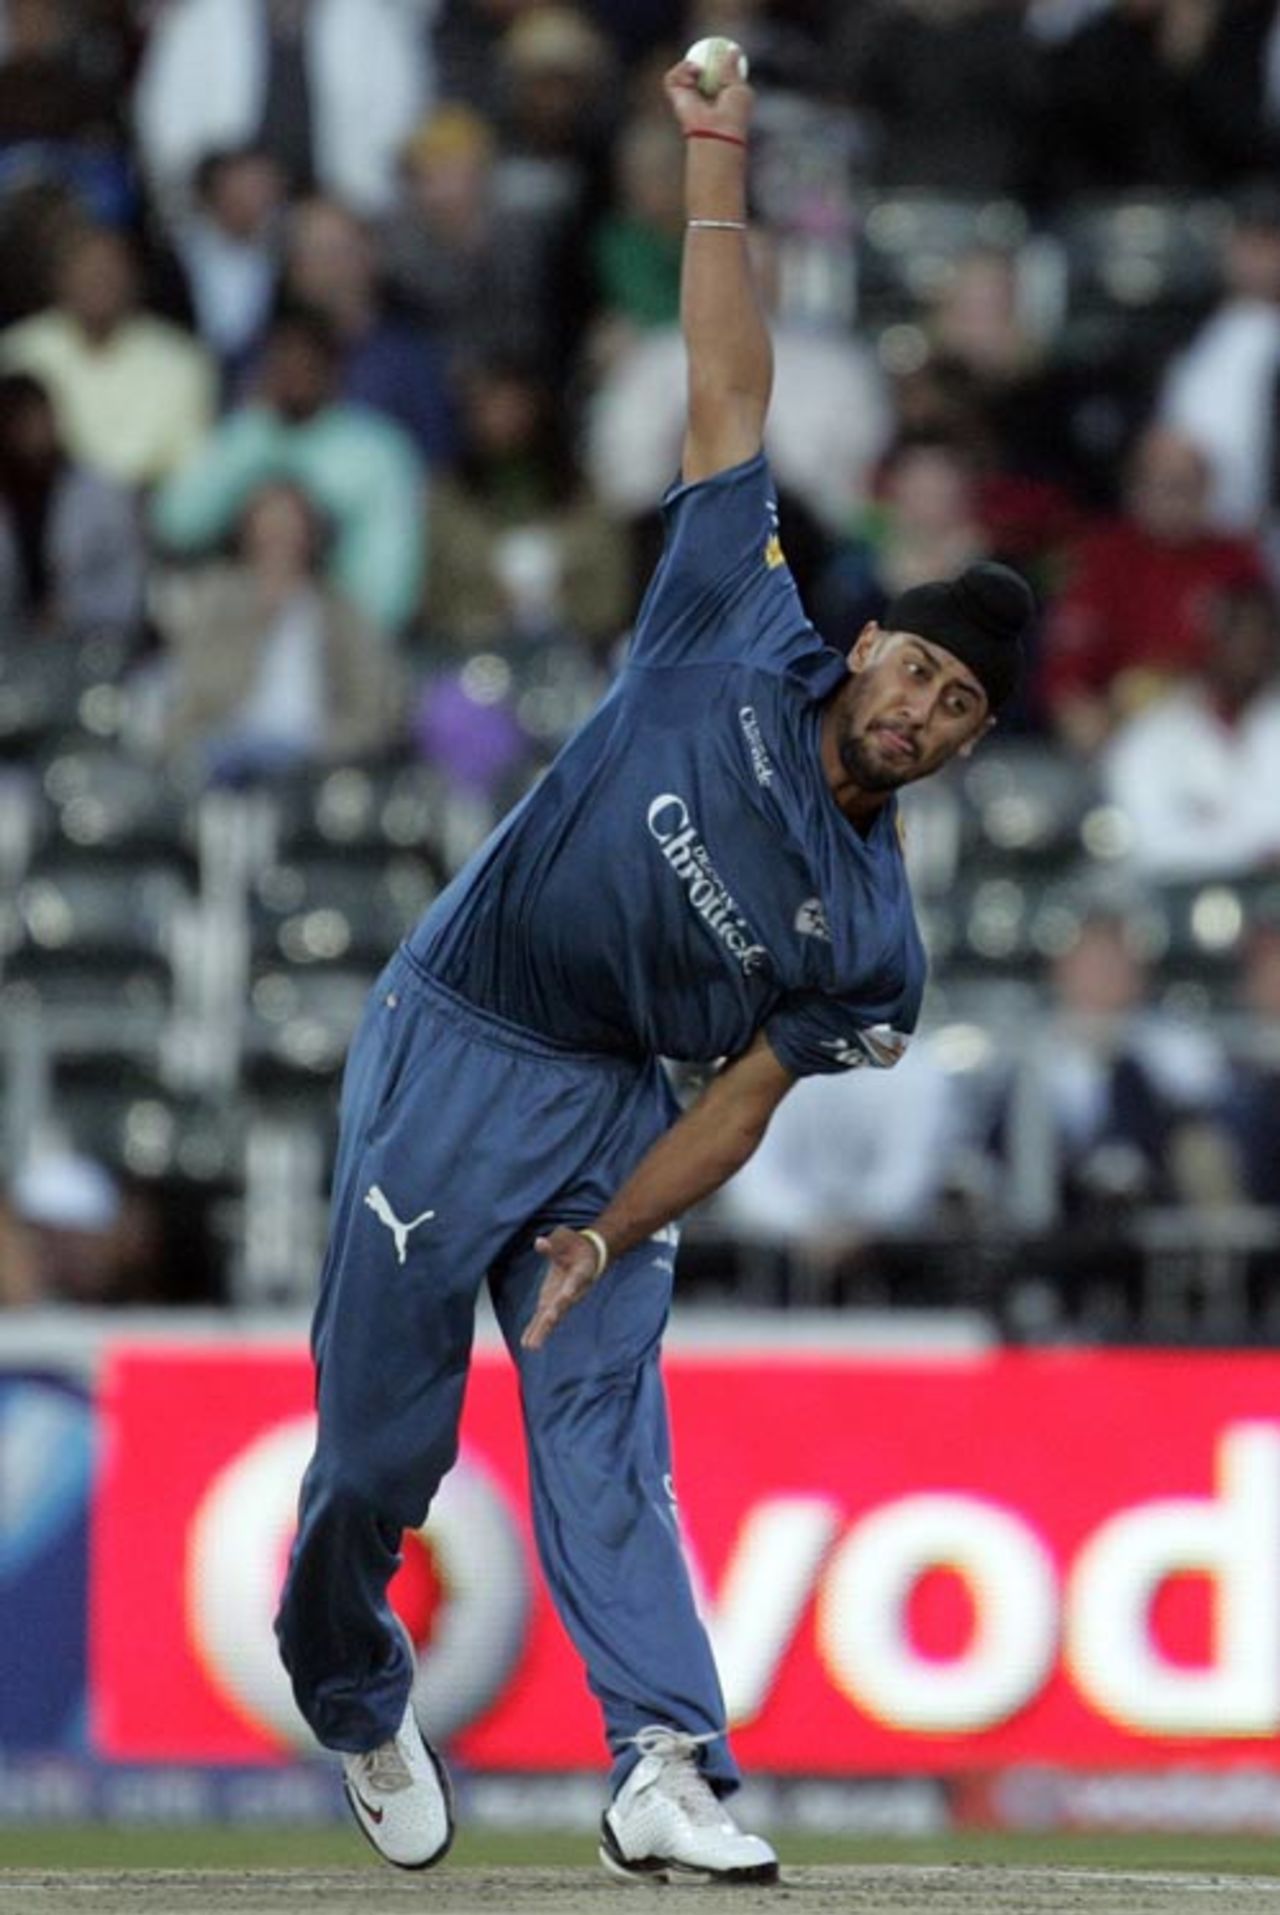 Harmeet Singh in his delivery stride, Deccan Chargers v Kolkata Knight Riders, IPL, Johannesburg, May 16, 2009 